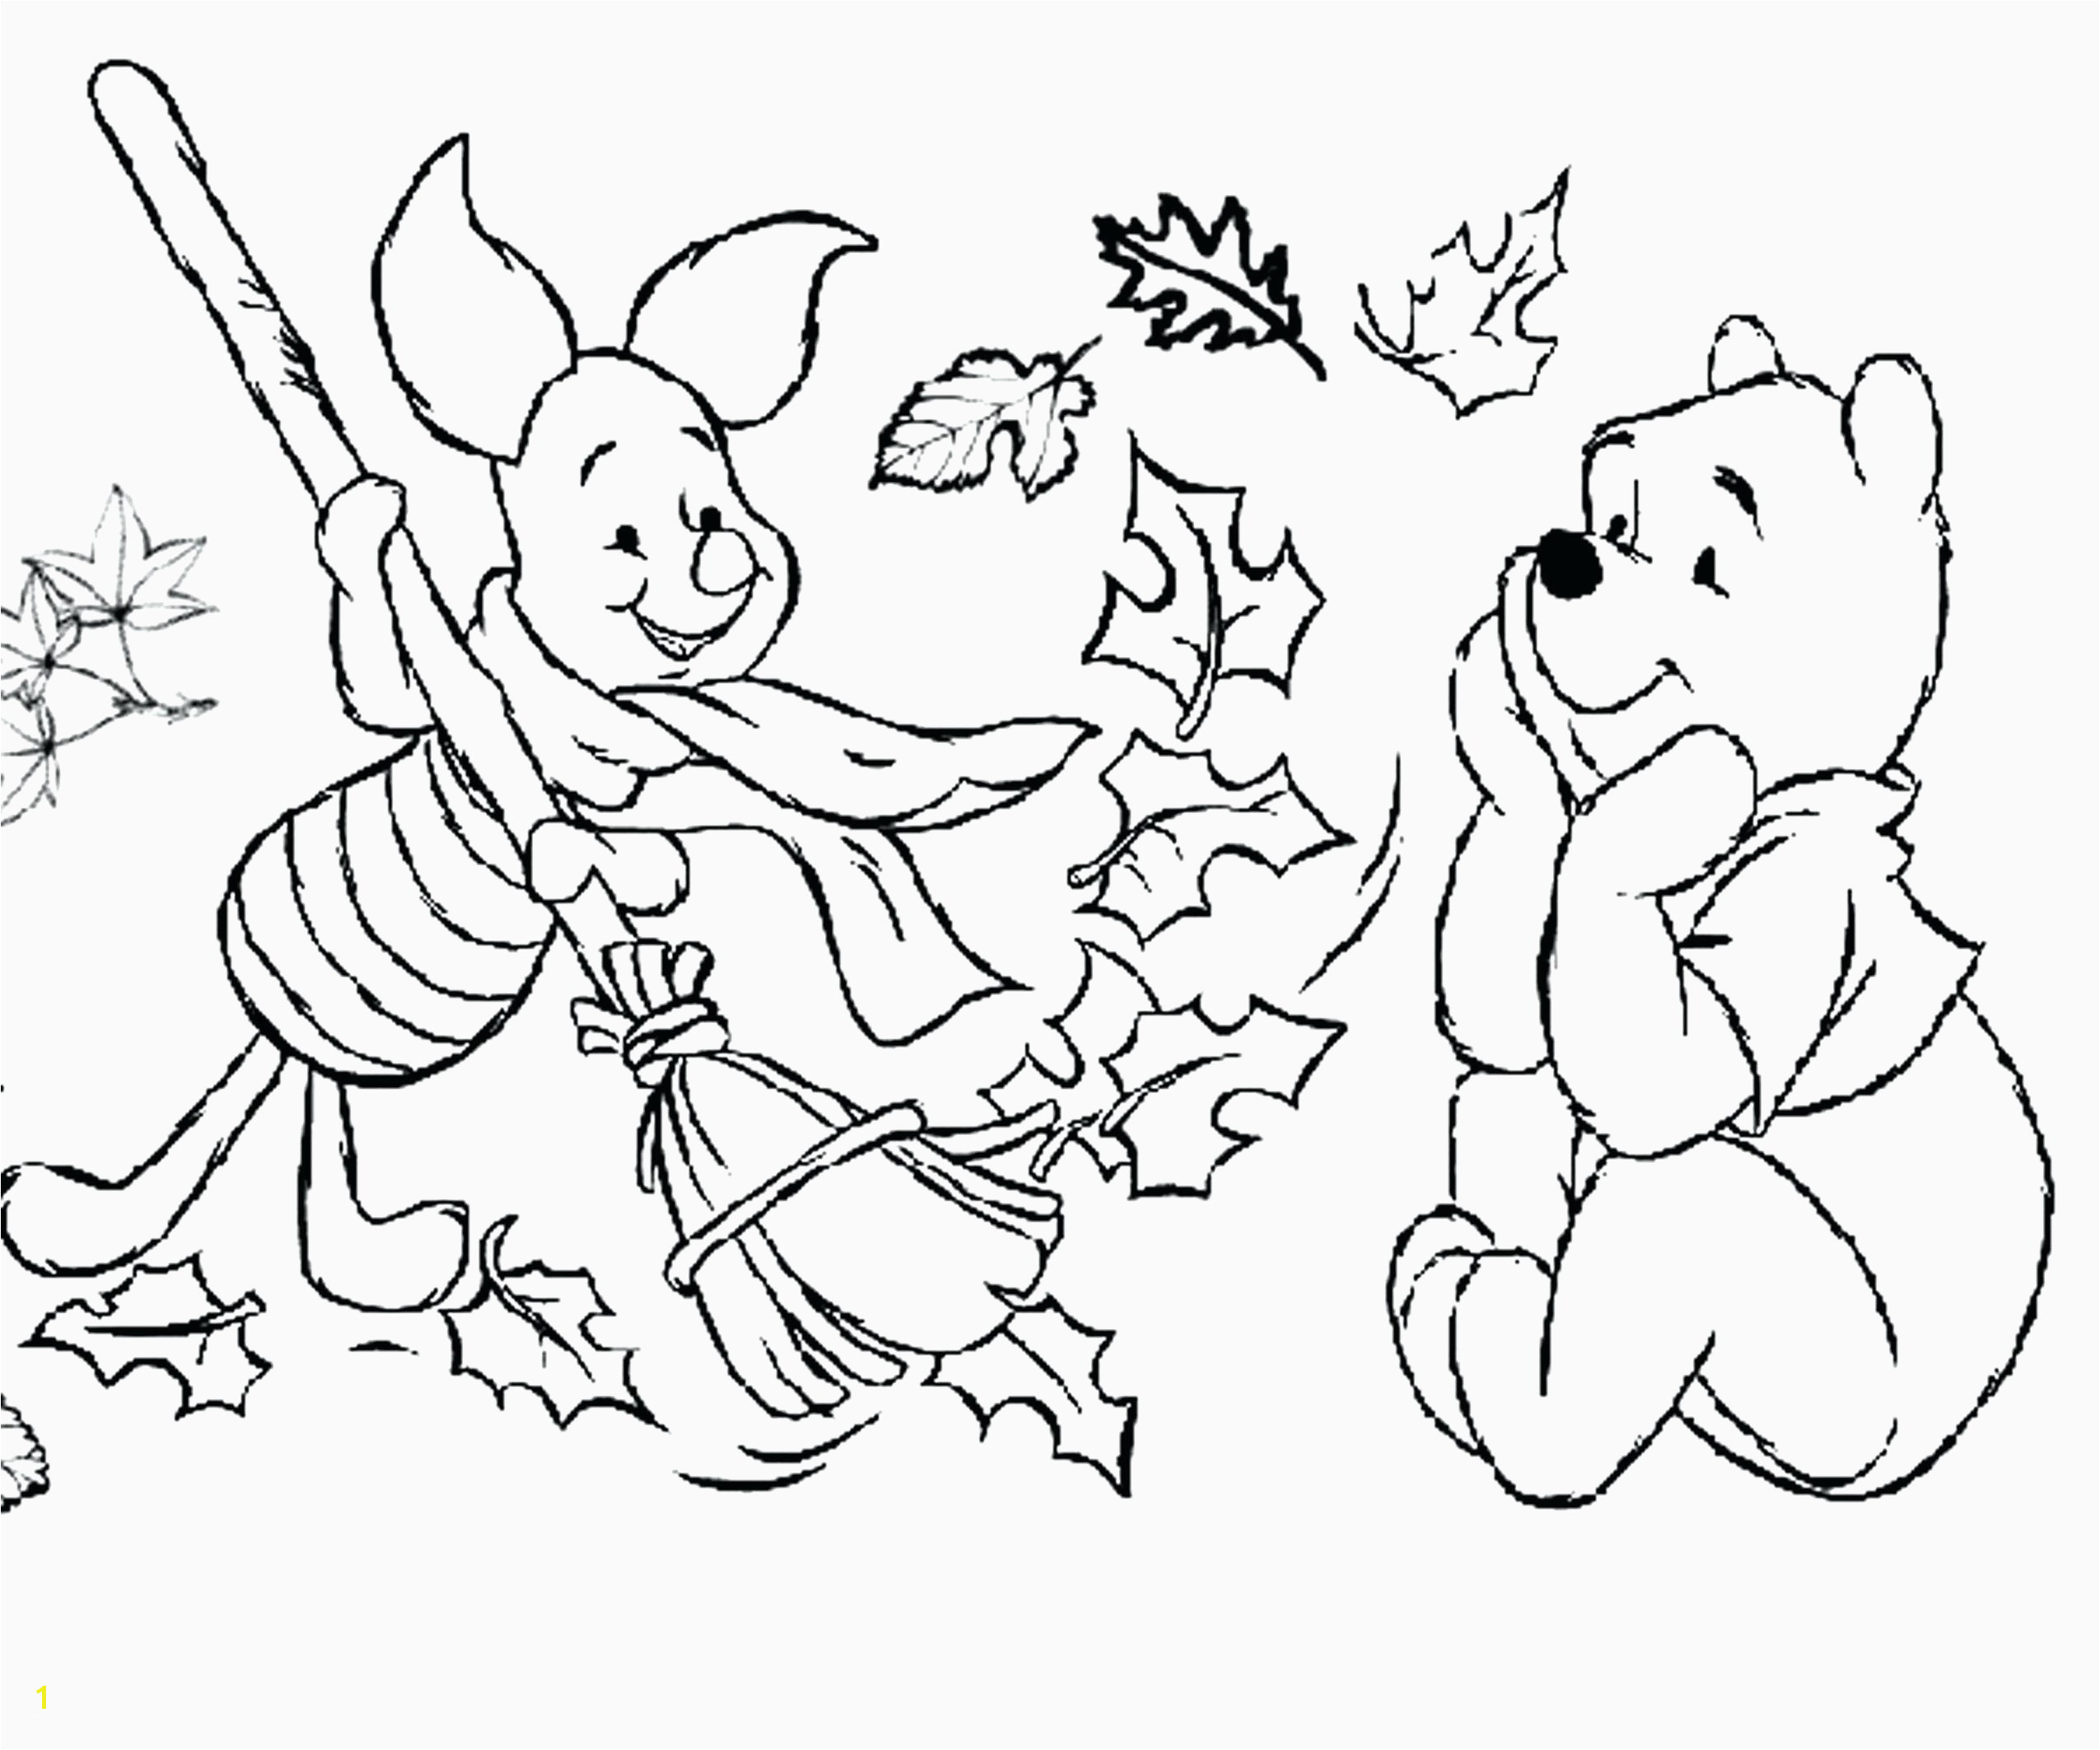 Free Preschool Coloring Pages Free Christian Coloring Pages for Preschoolers Coloring Pages A